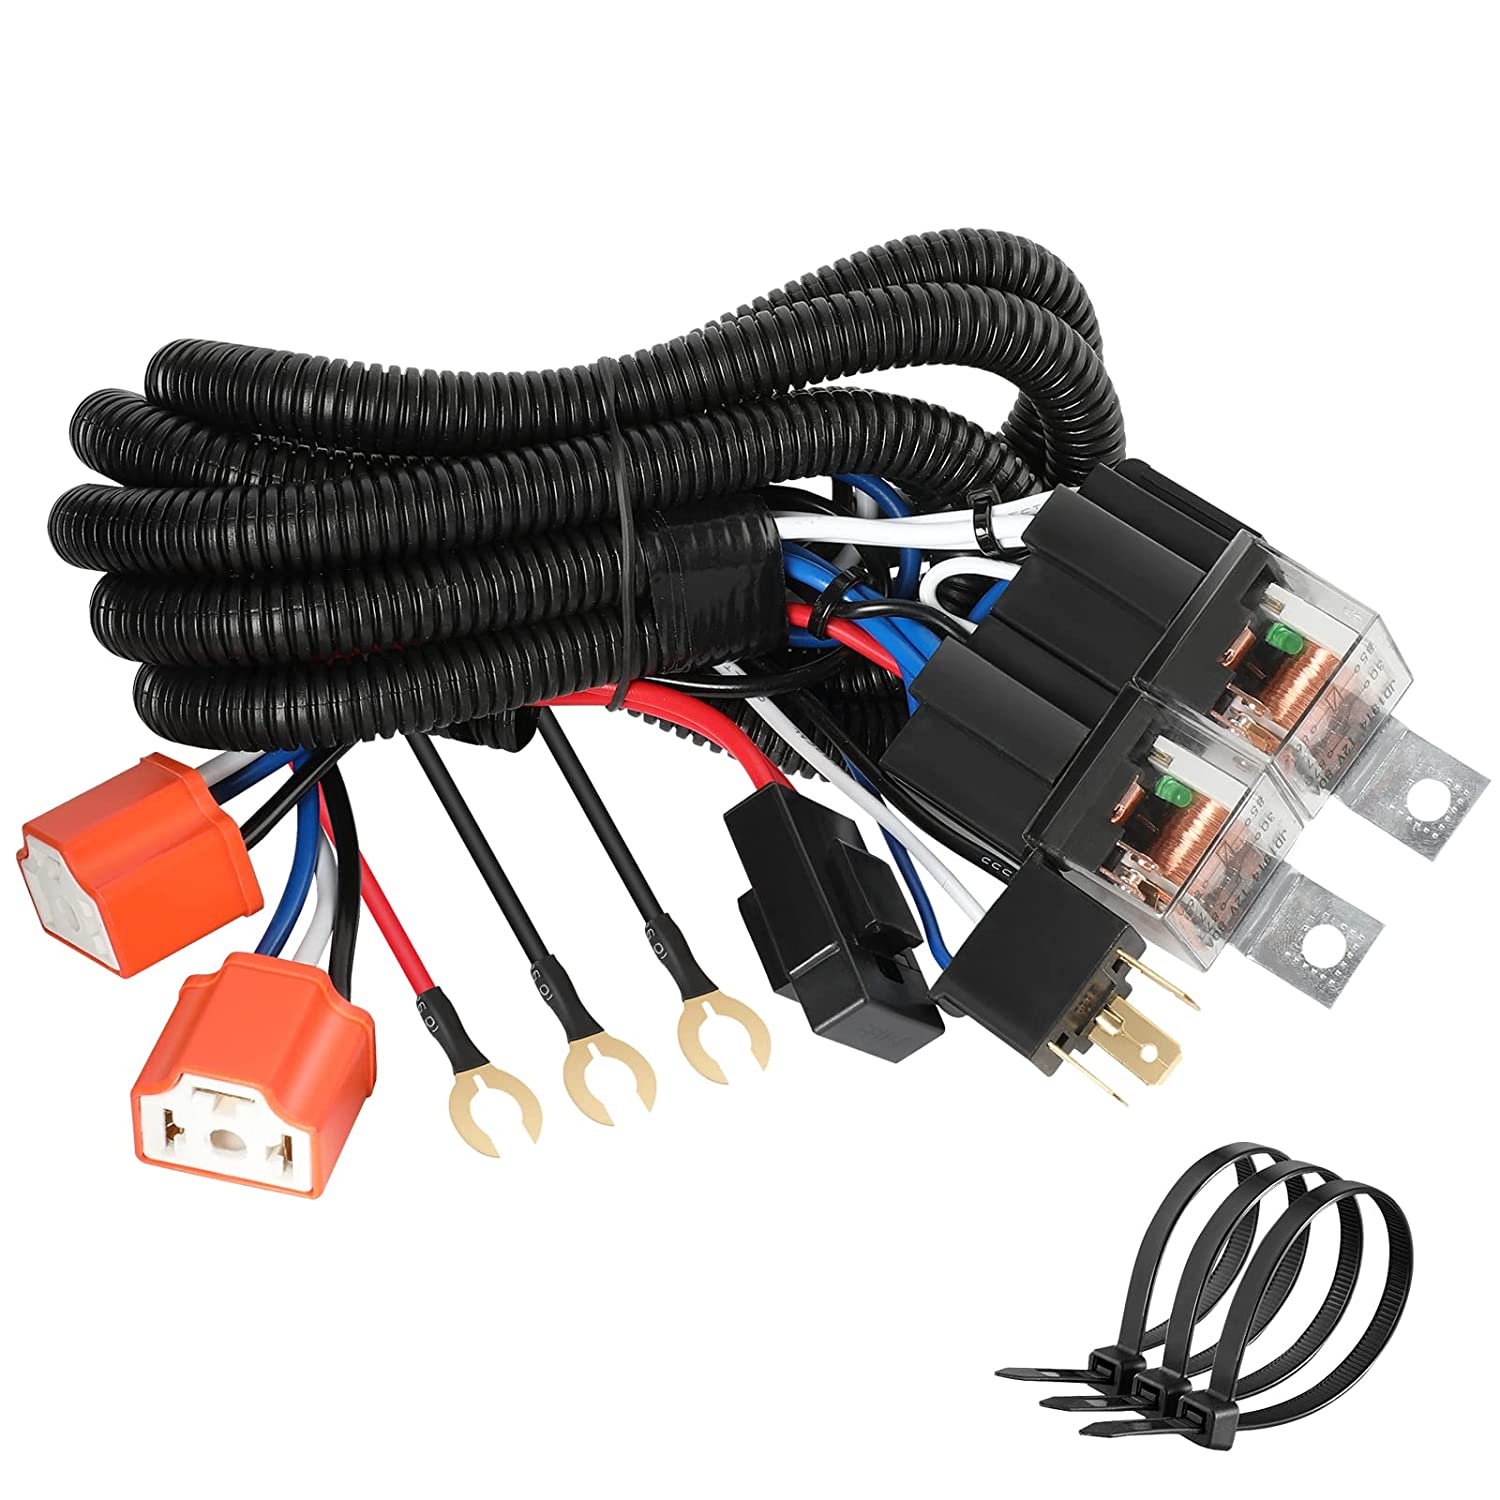 What is the car light wire harness?